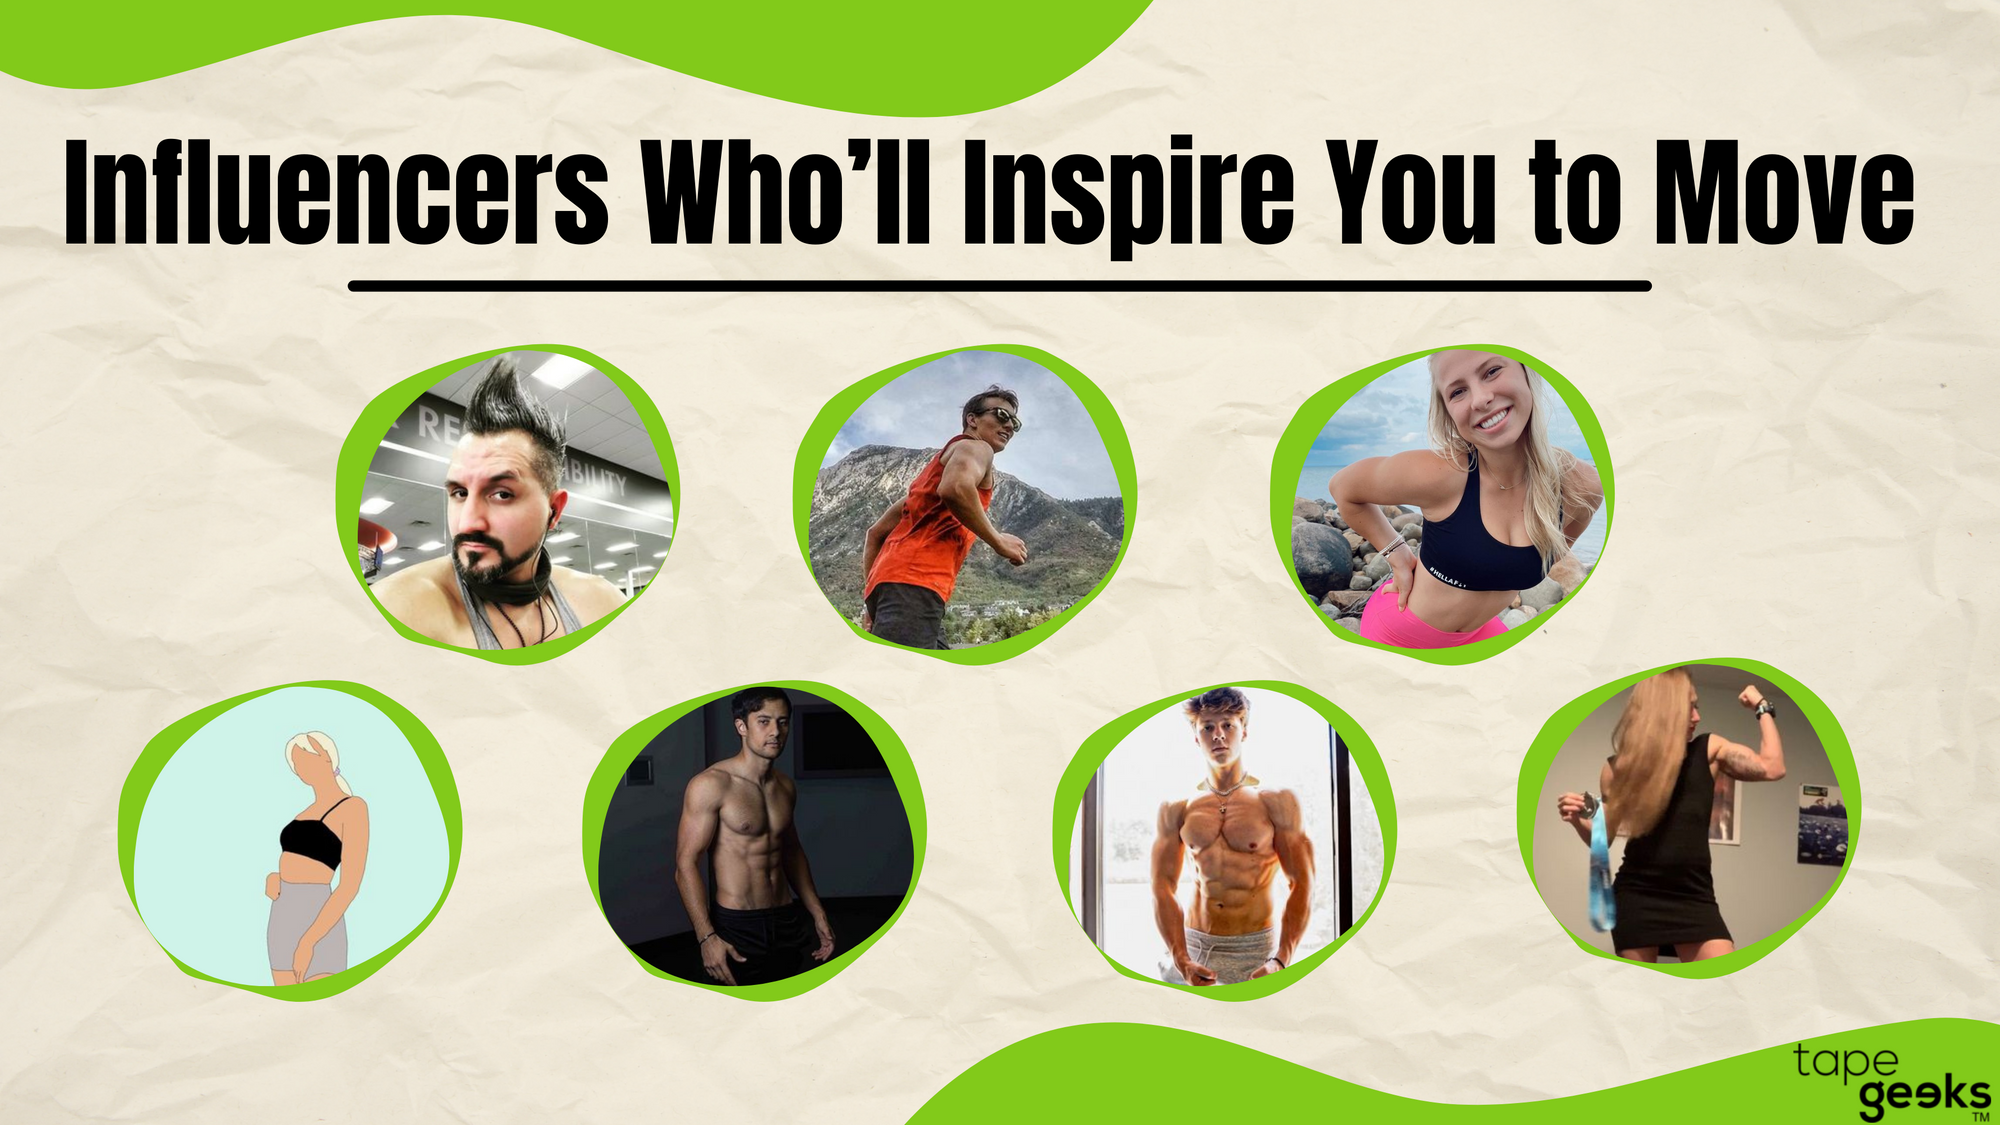 7 Top Fitness Influencers Who Will Inspire you to Move